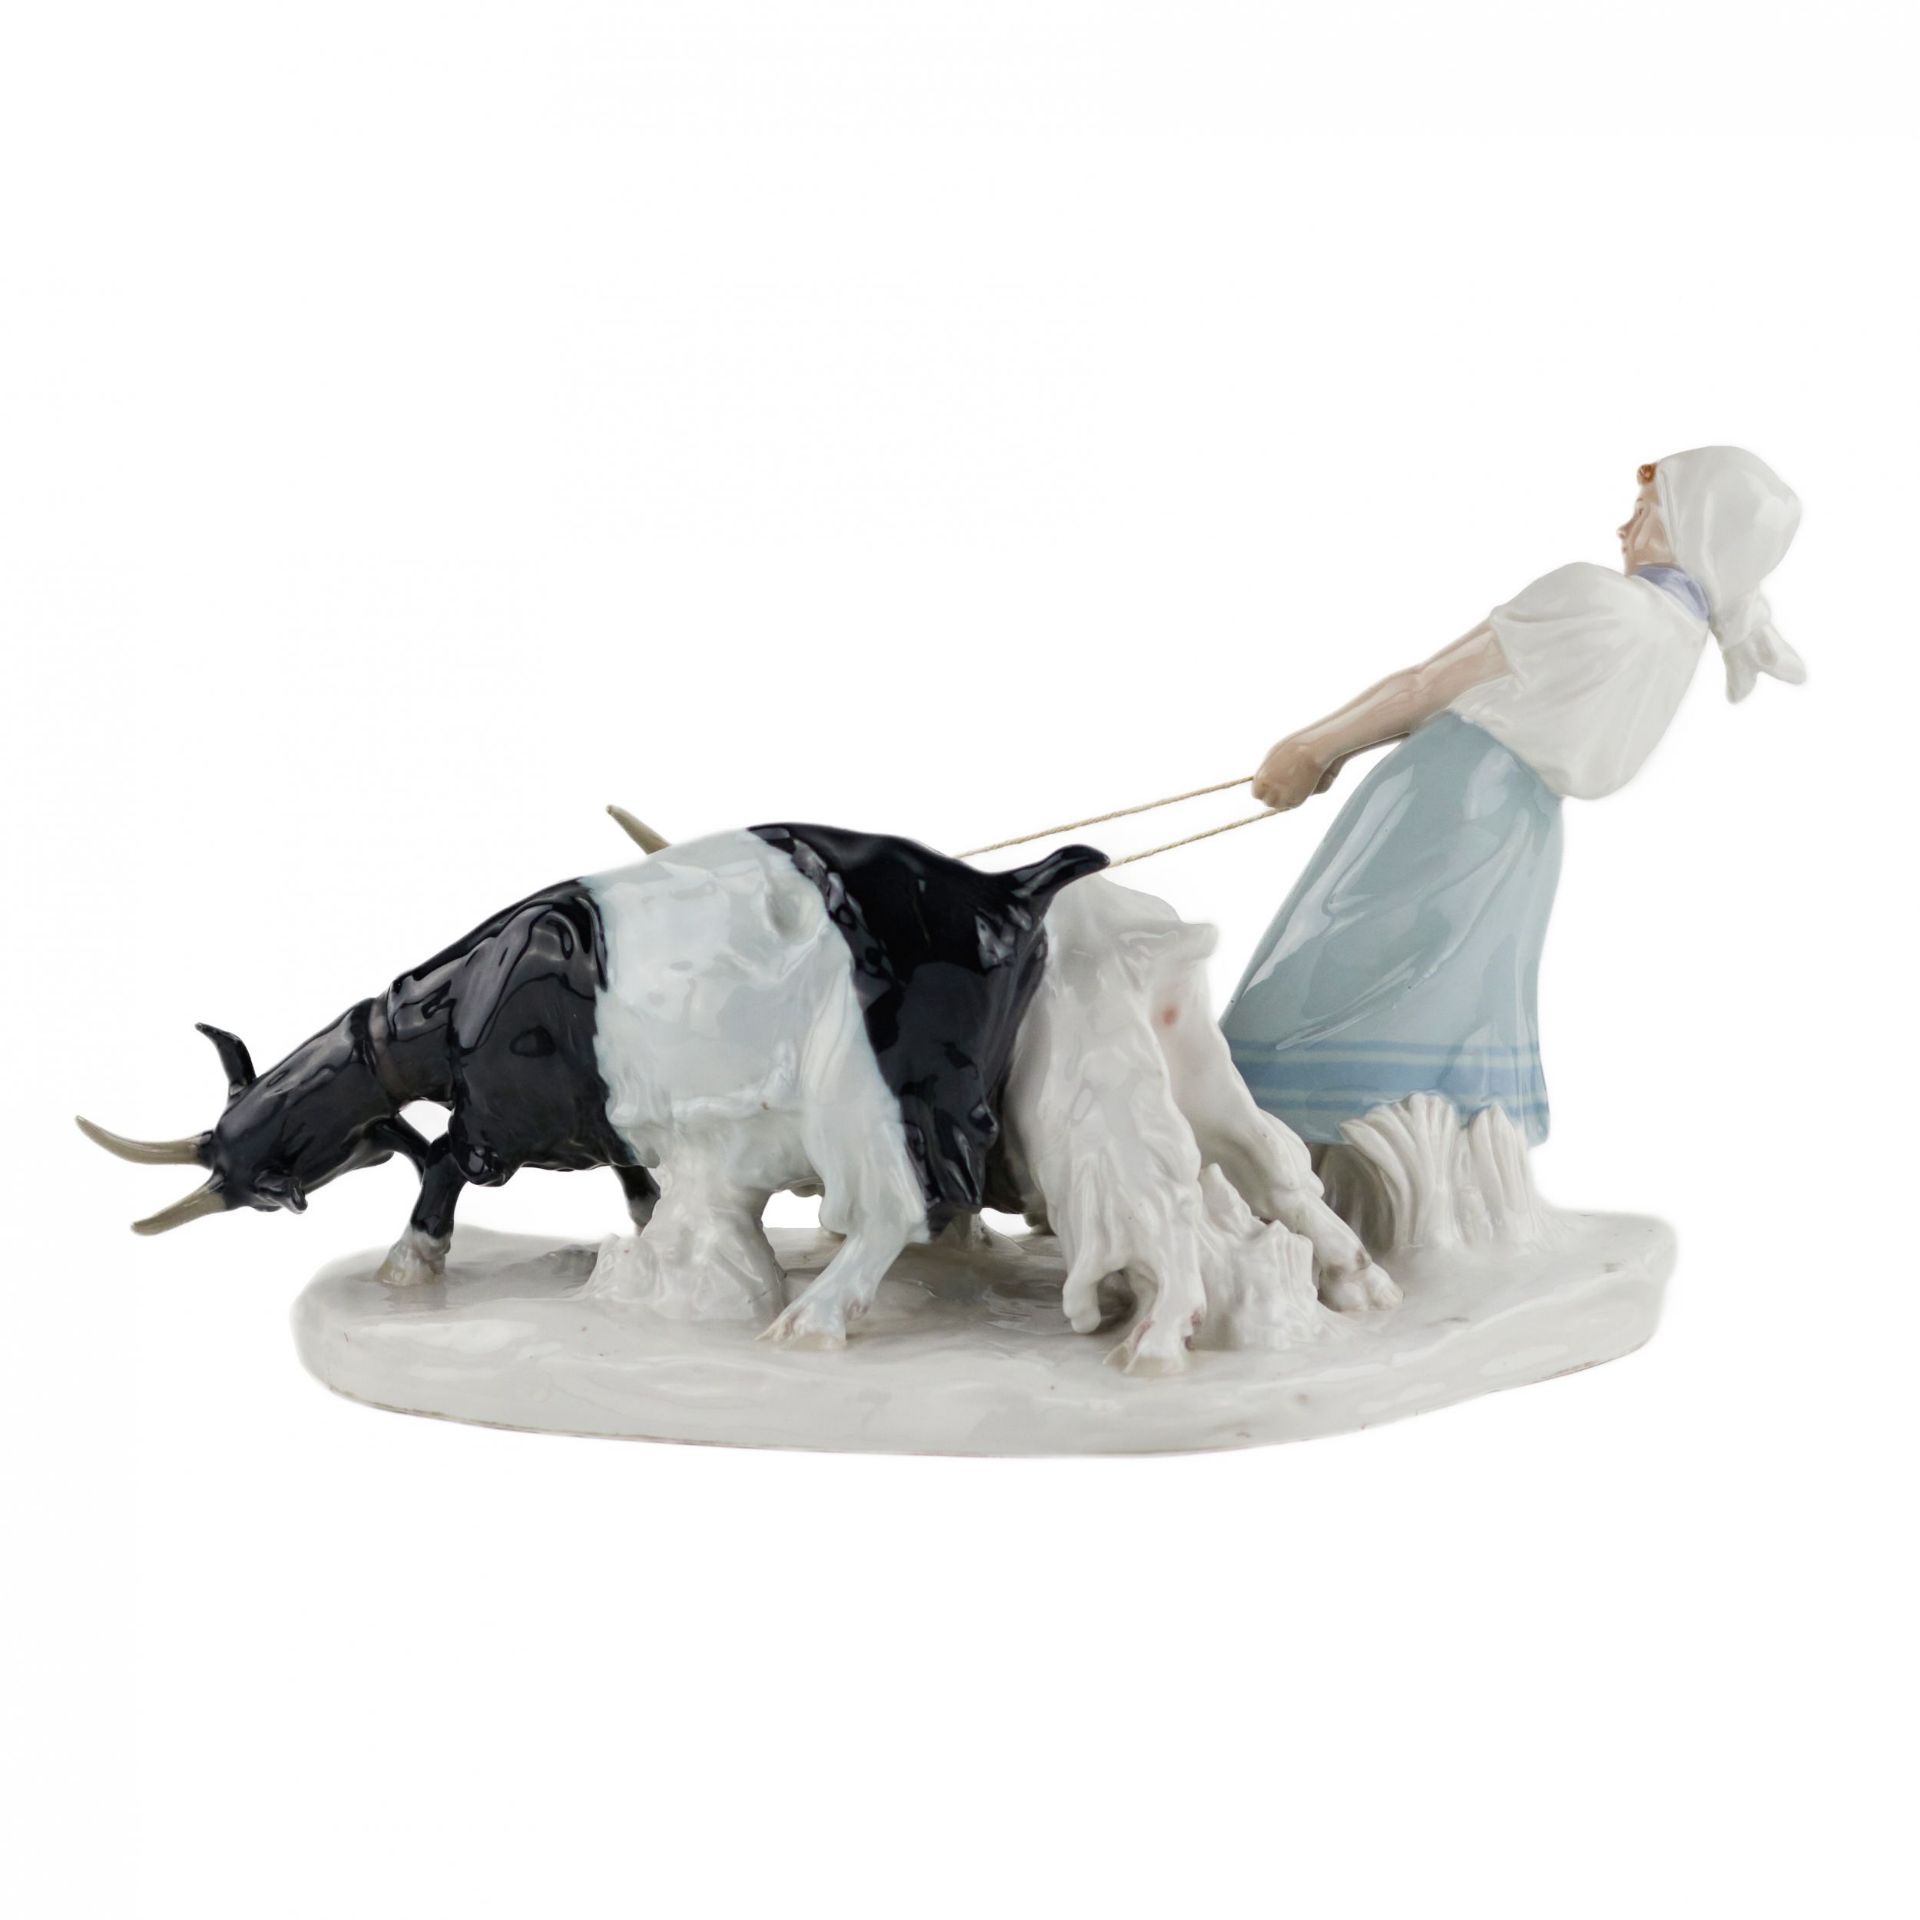 Porcelain composition Shepherdess with goats. Pilz, Otto. Meissen. 1850-1924. - Image 3 of 7